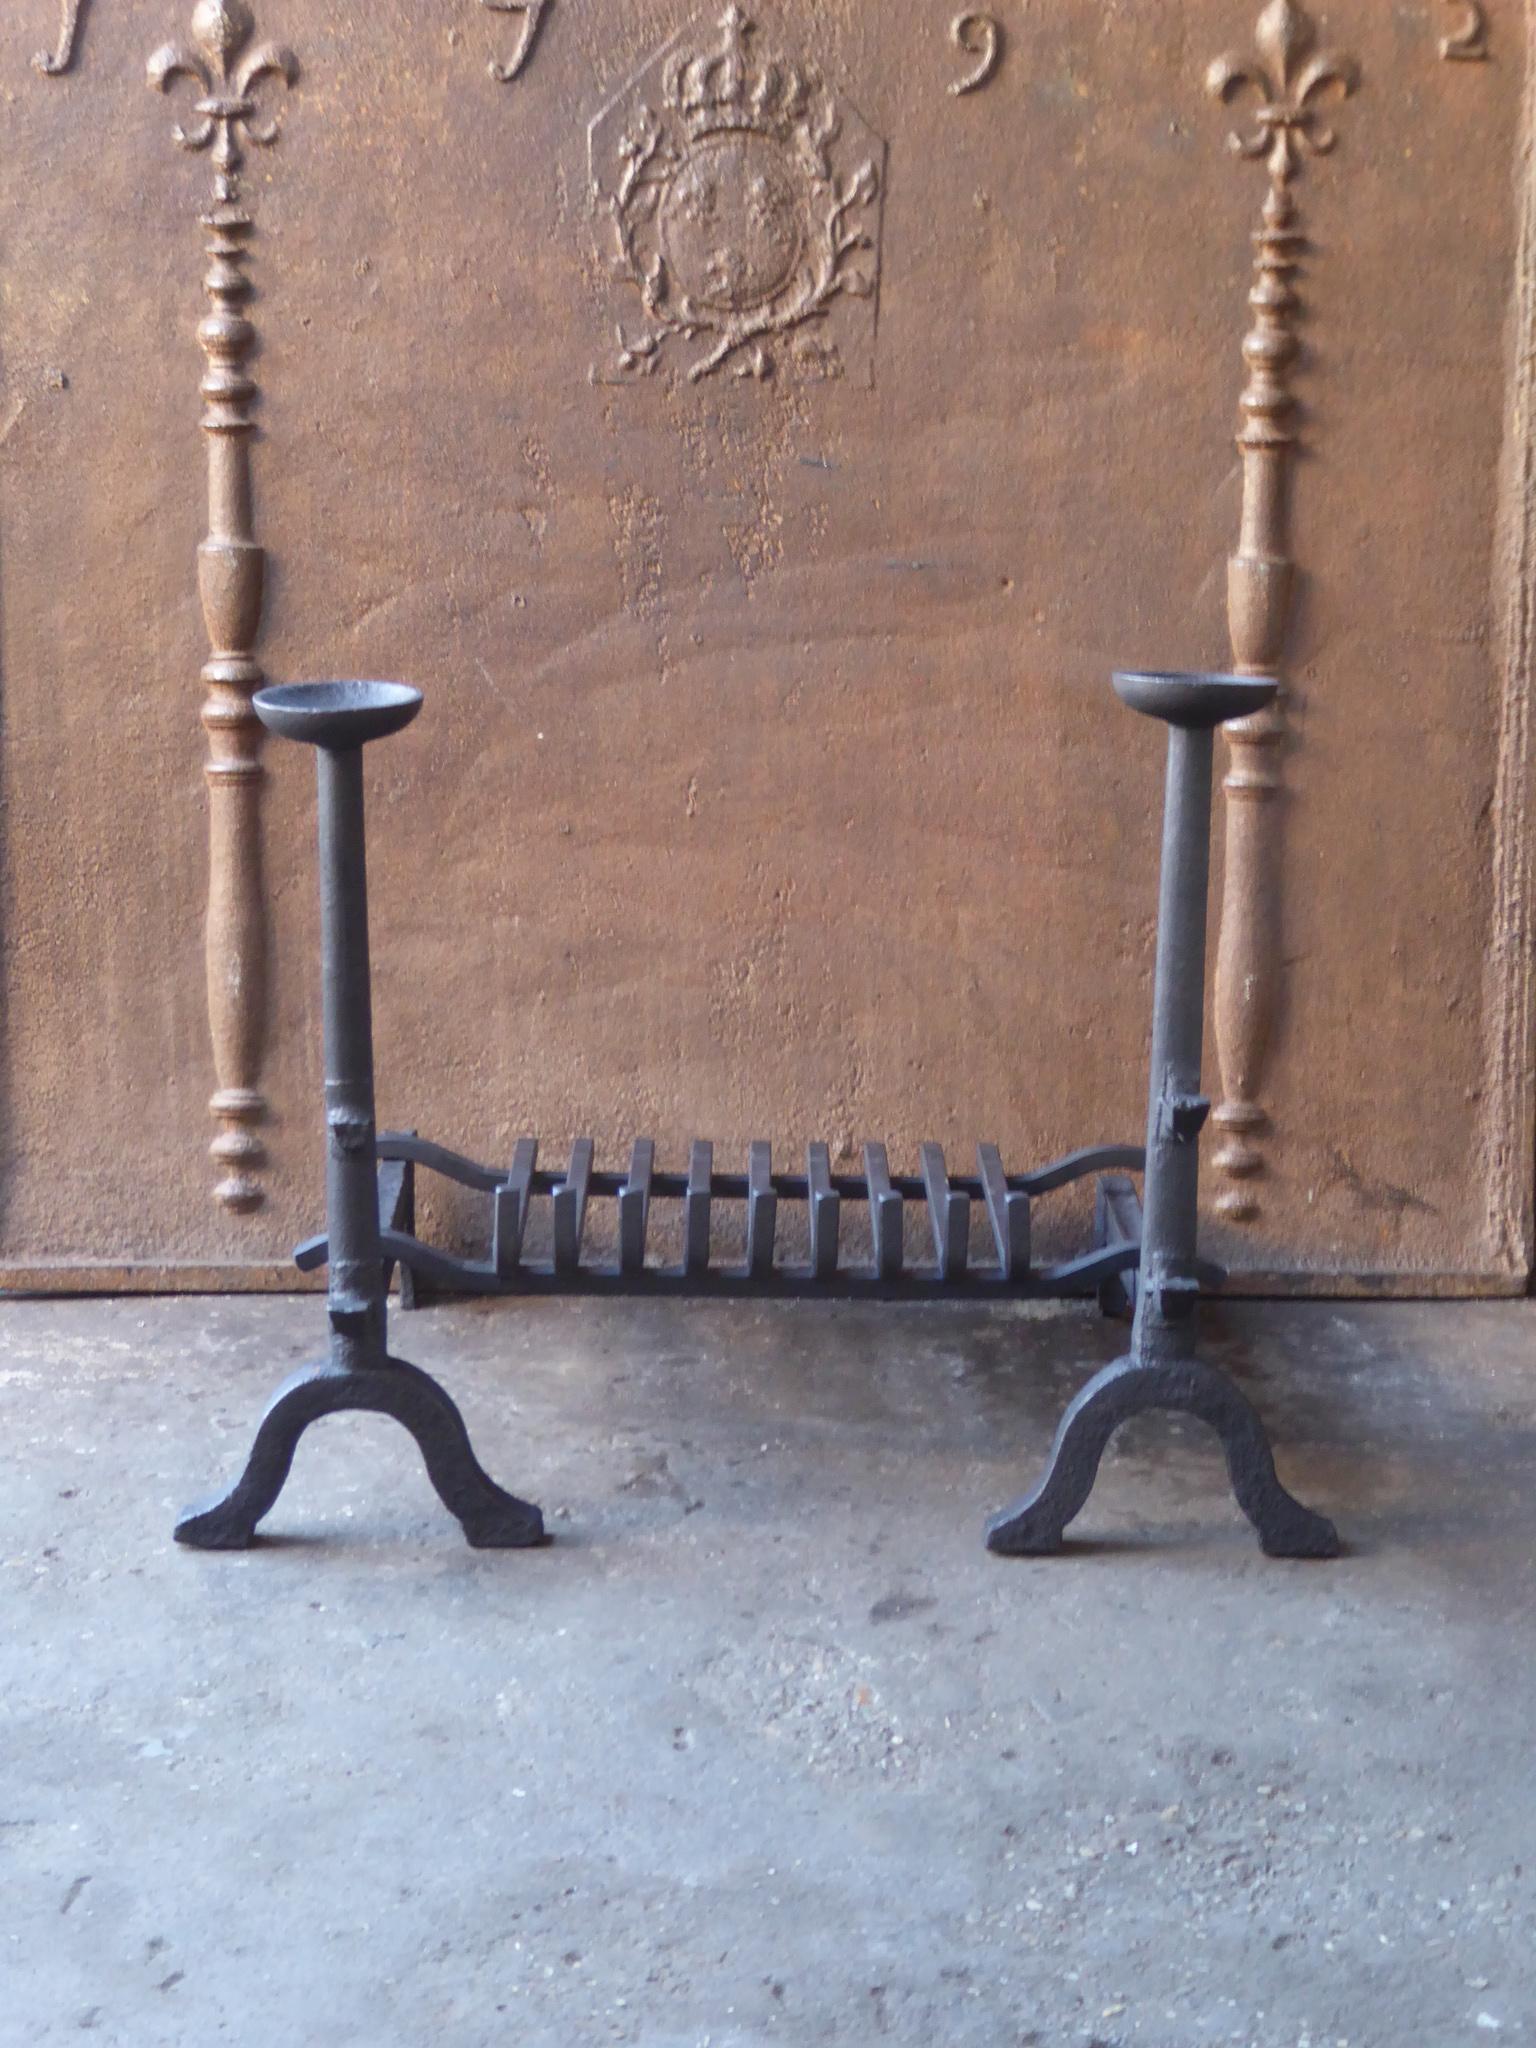 18th - 19th Century French Gothic Style fireplace basket - fire basket made of wrought iron and cast iron. The basket is in a good condition and is fully functional. The total width of the front of the fireplace grate is 70.0 cm or 27.6 inch.